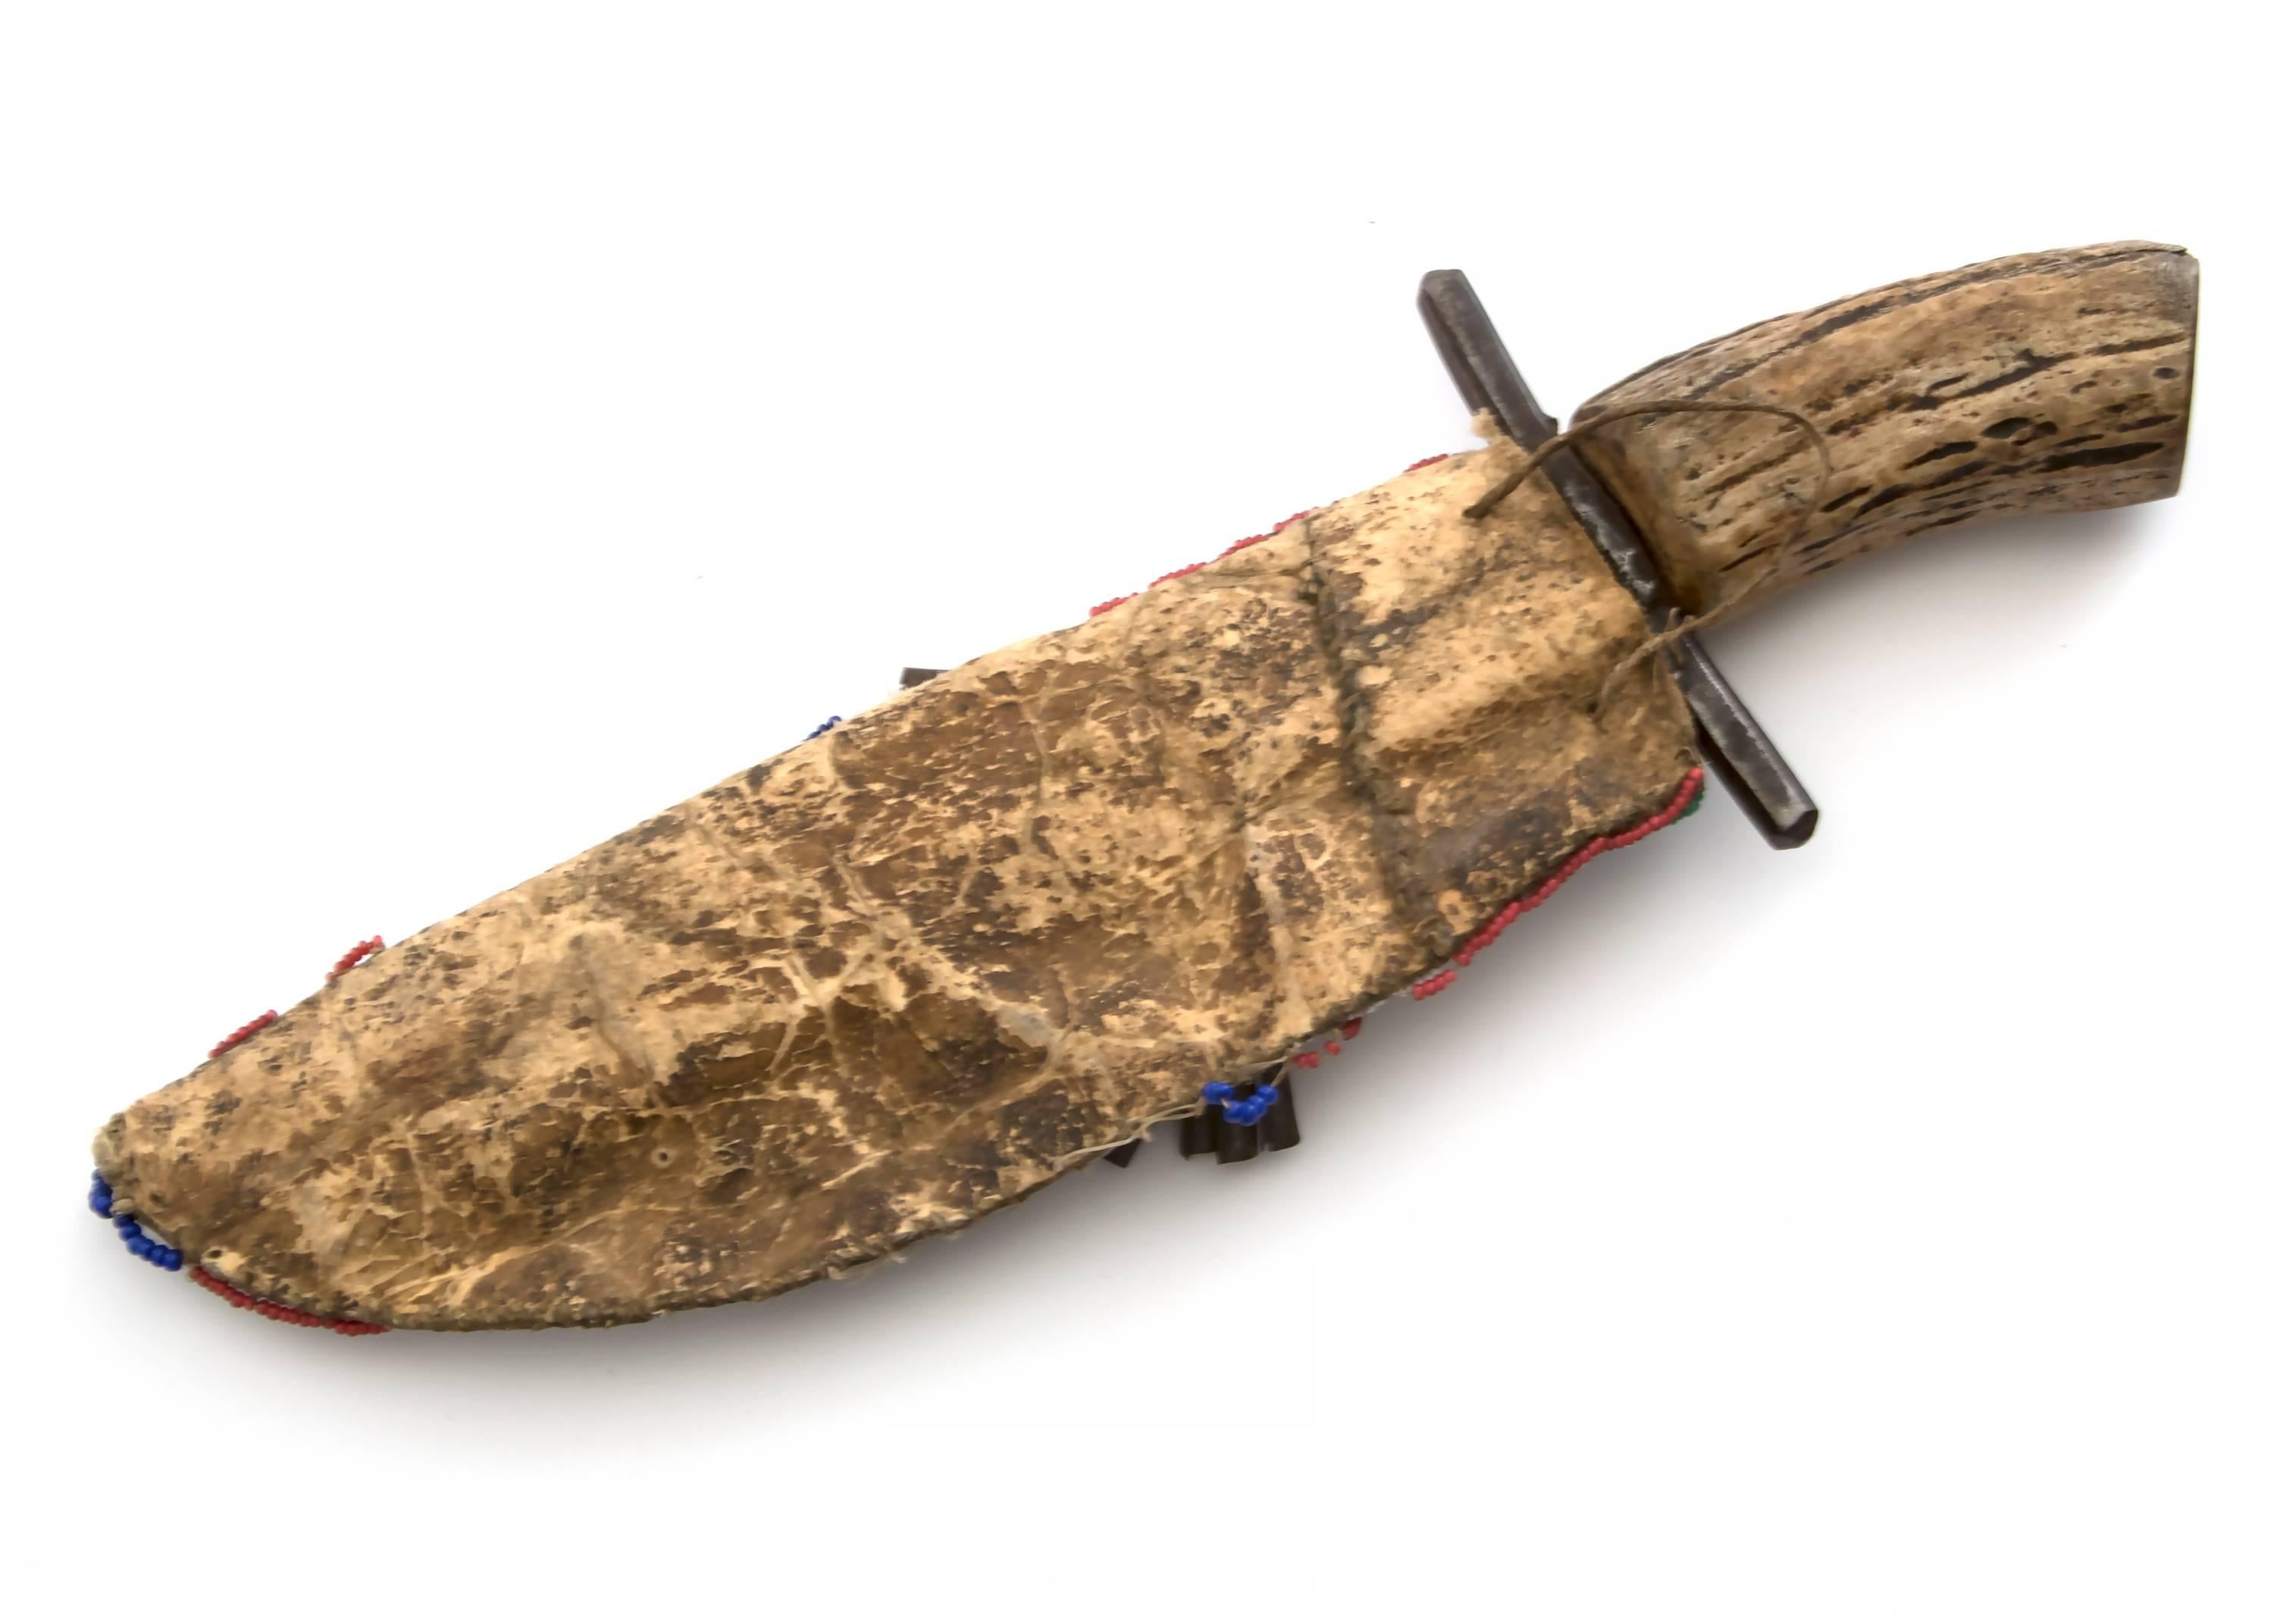 A knife sheath with knife.

A Nomadic tribe, the Sioux are associated with areas of the great plains of the United States including present-day North and South Dakota, Minnesota, Nebraska and Montana. 

Expedited and international shipping is